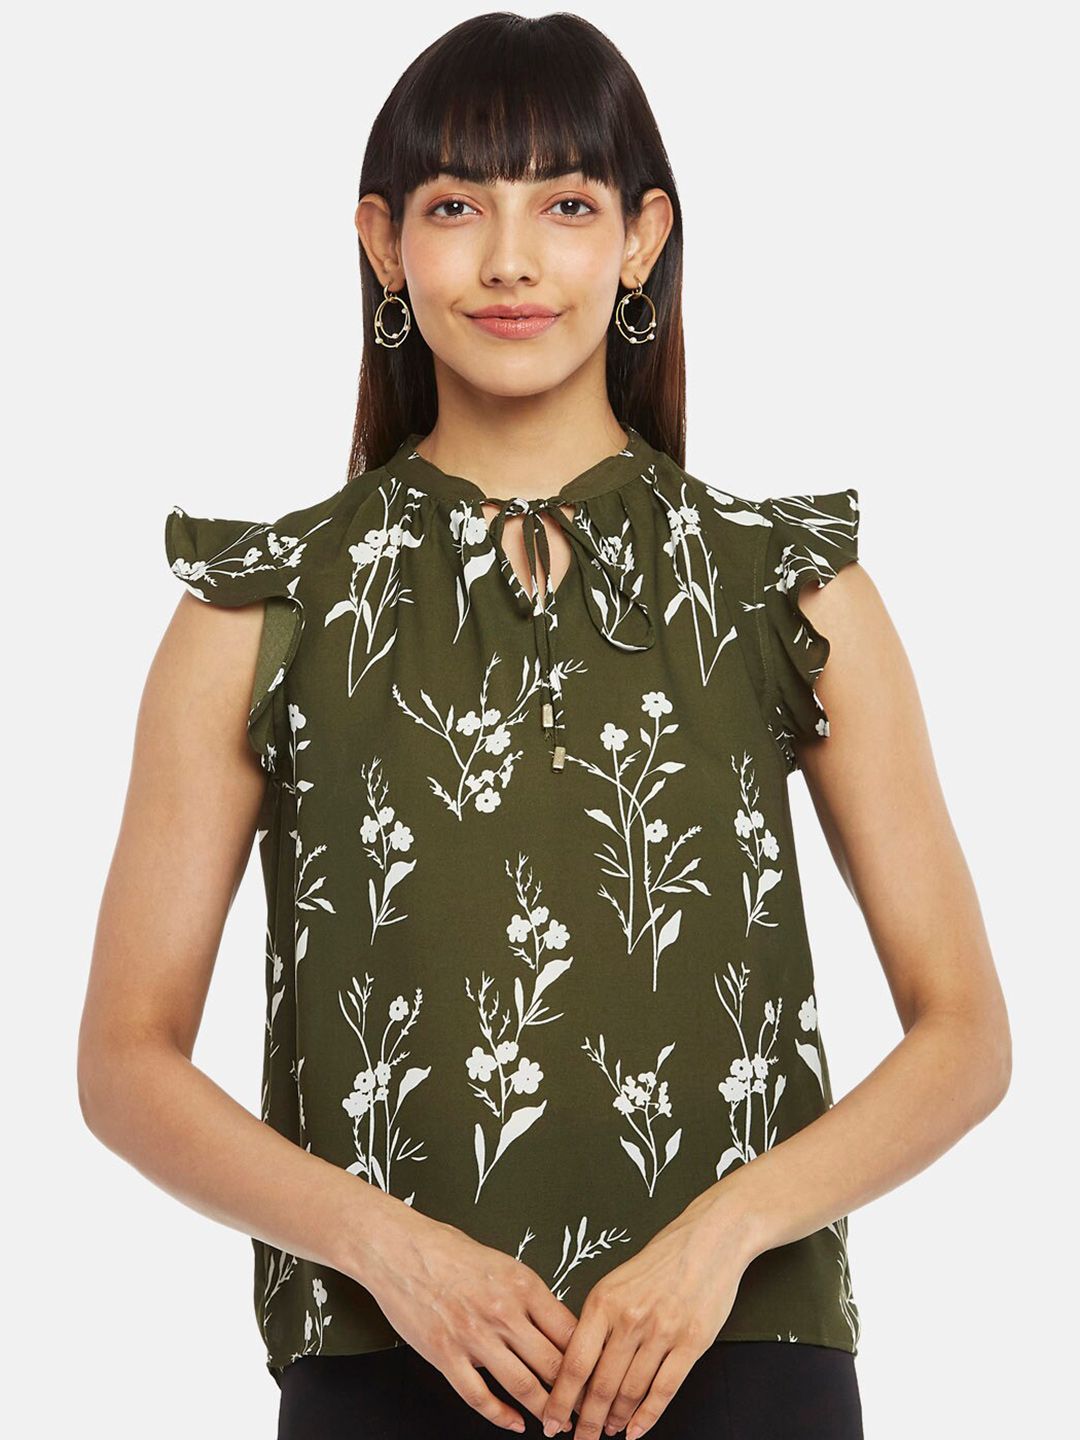 Annabelle by Pantaloons Olive Green Floral Print Tie-Up Neck Top Price in India